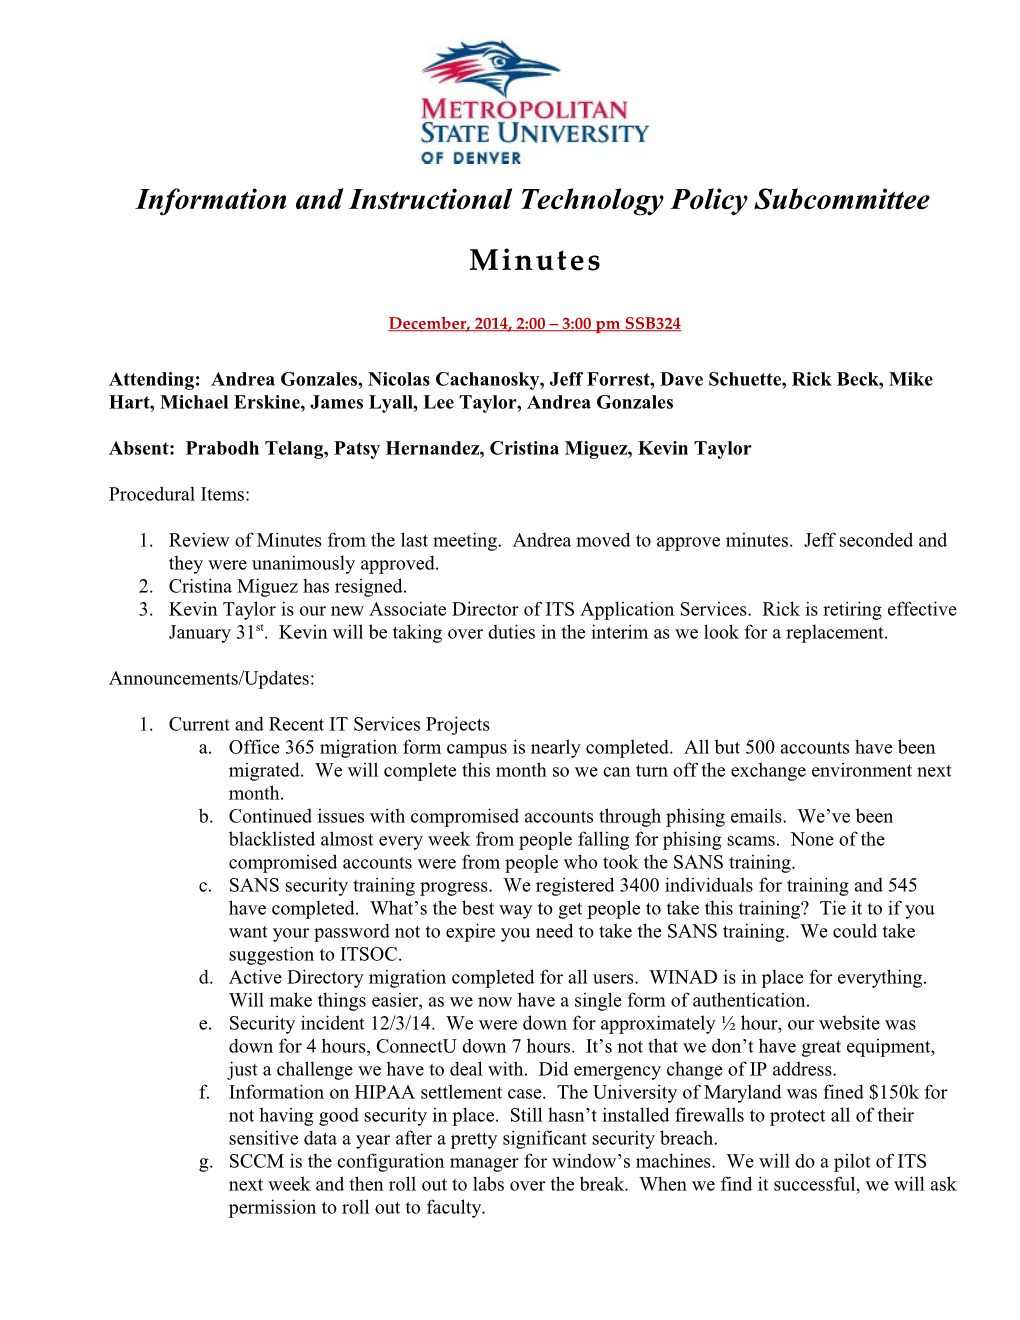 Information and Instructional Technology Policy Subcommittee